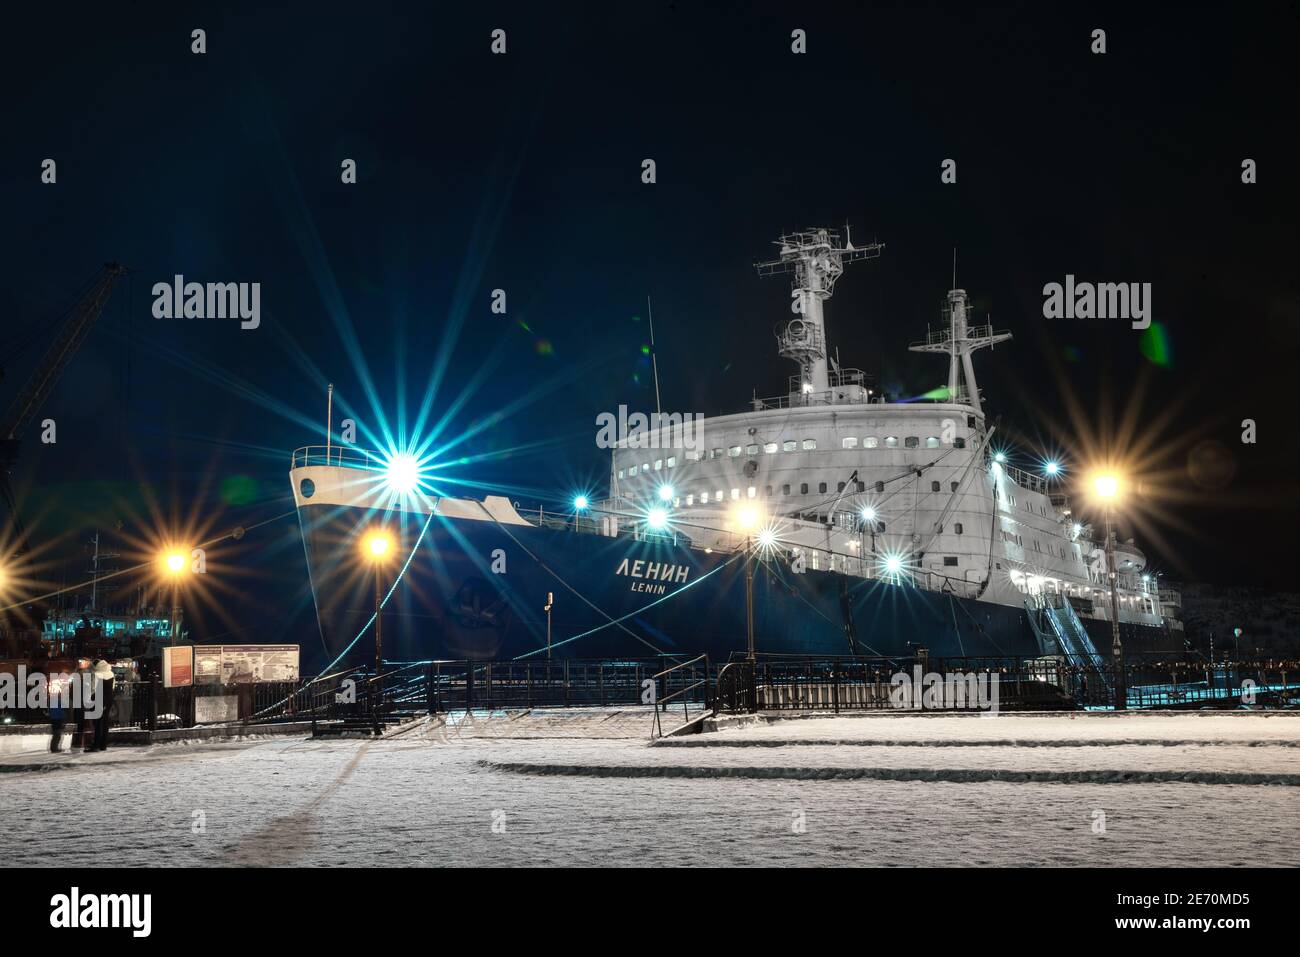 Murmansk, Russia - January 02, 2021: The first nuclear-powered icebreaker ship Lenin at a pier at winter. Translation: 'Lenin' Stock Photo